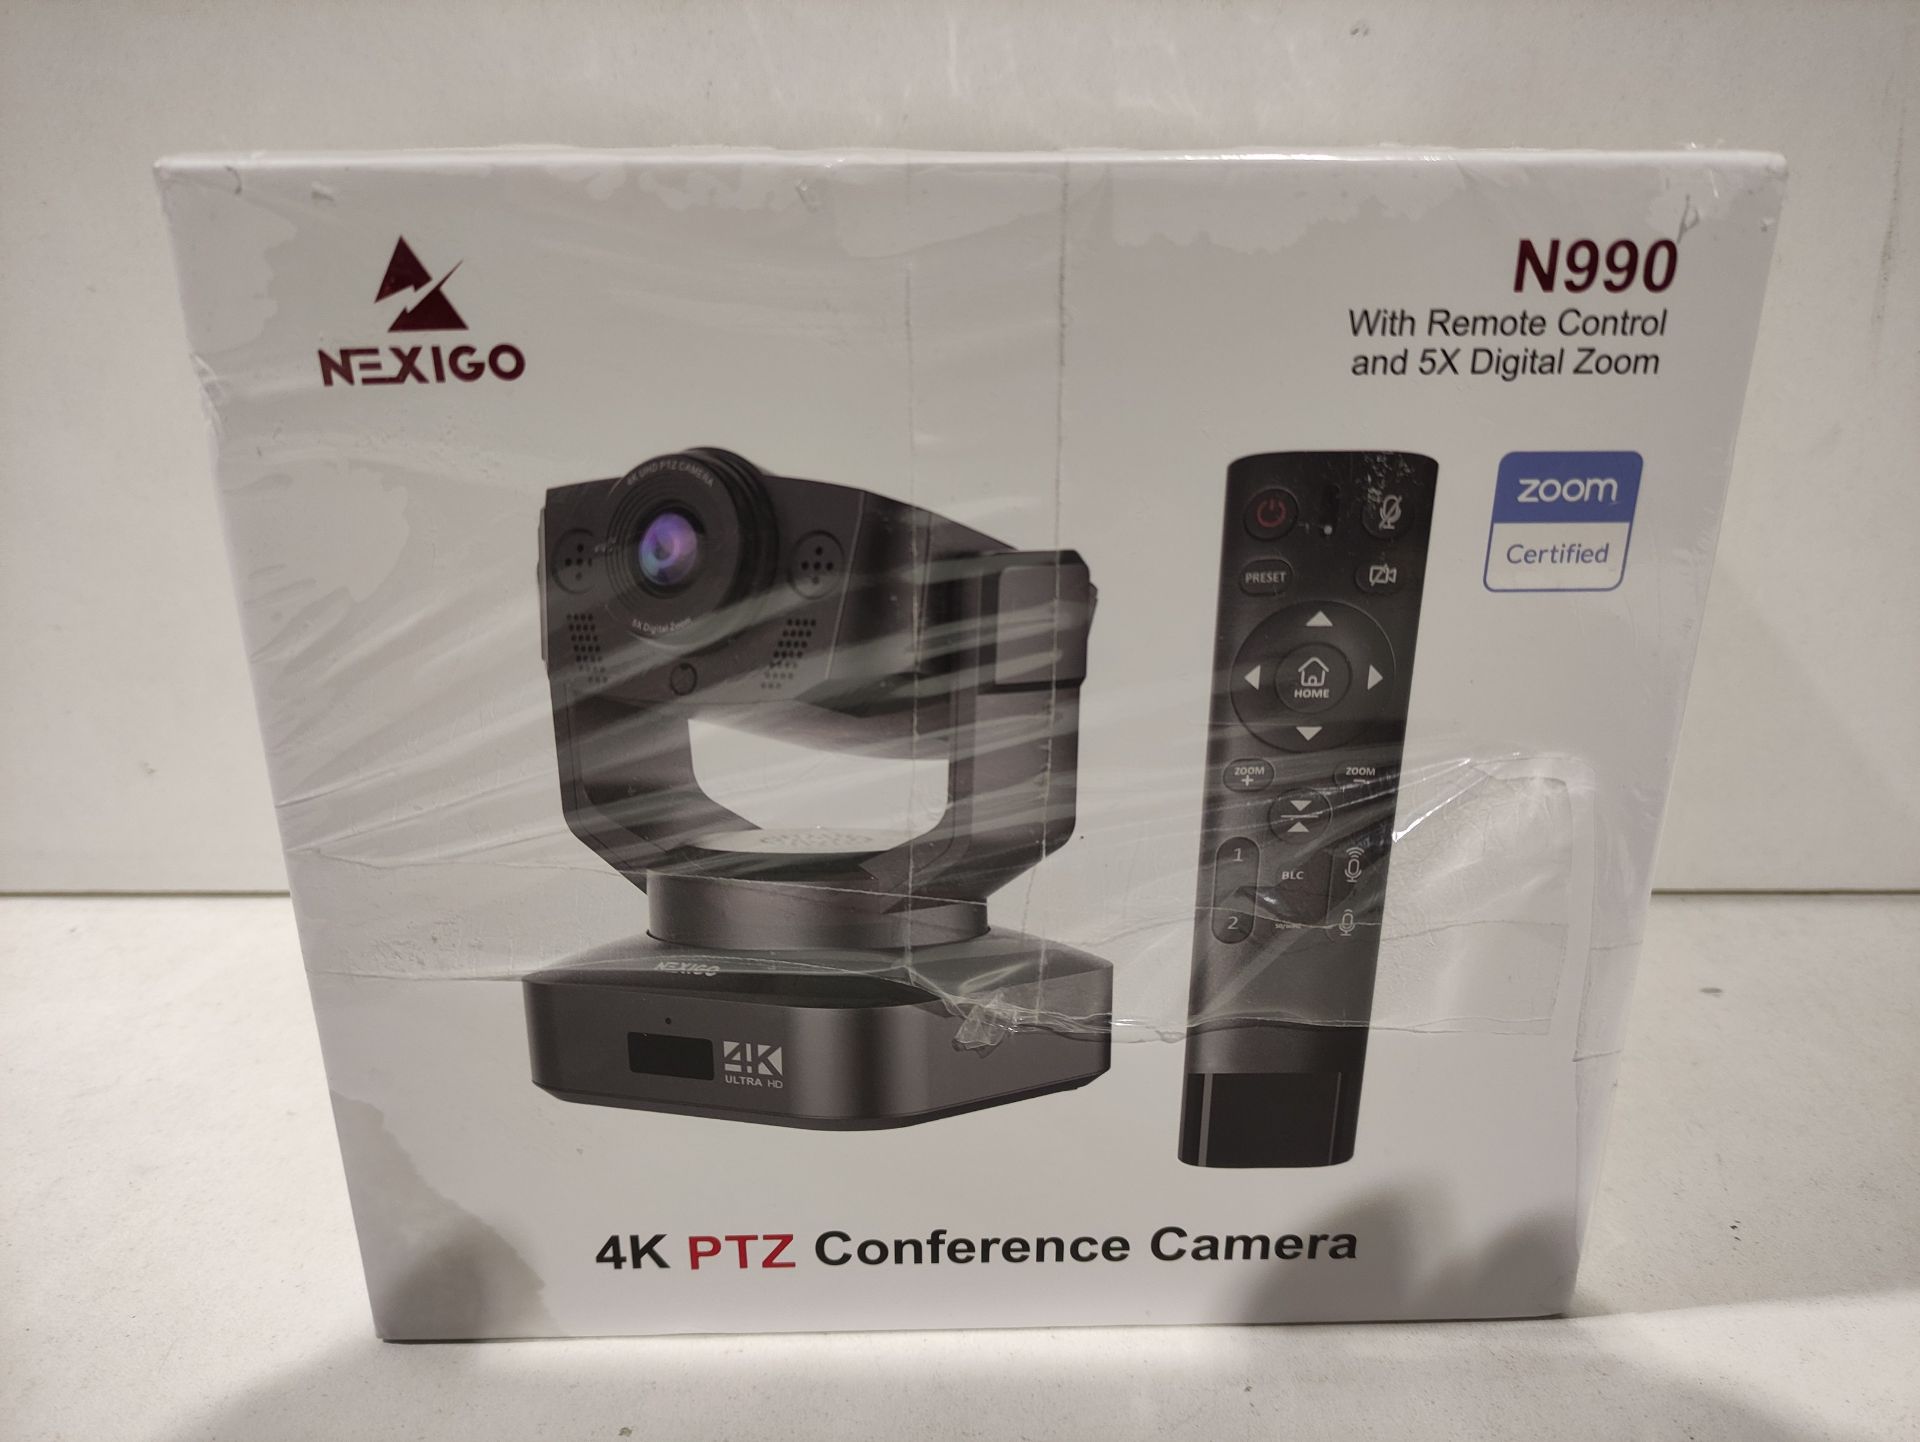 RRP £200.59 Zoom Certified - Image 2 of 2